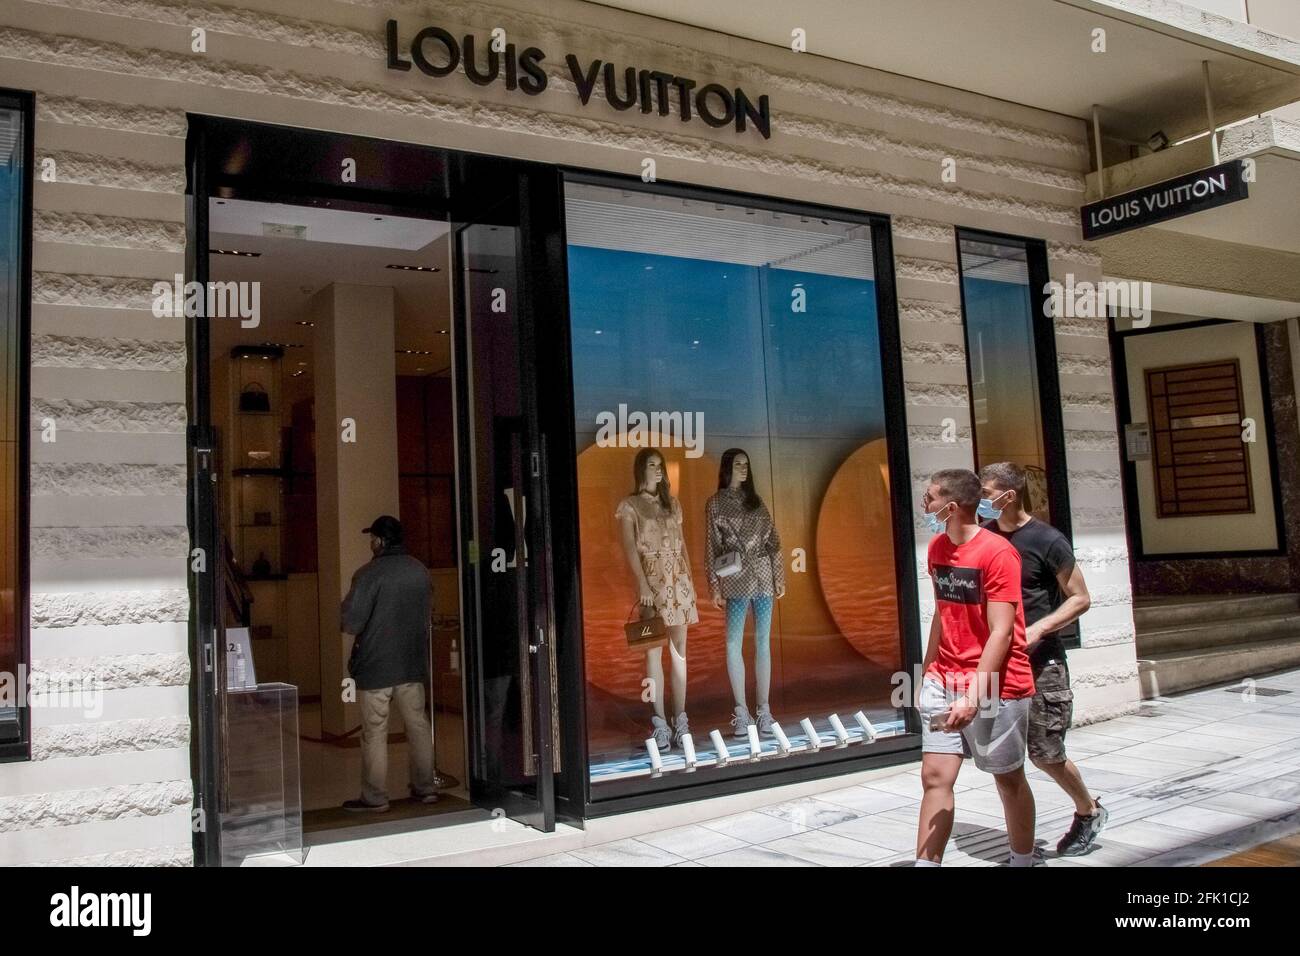 Athens, Greece. 27th Apr, 2021. People seen walking past a Louis Vuitton  store in the area